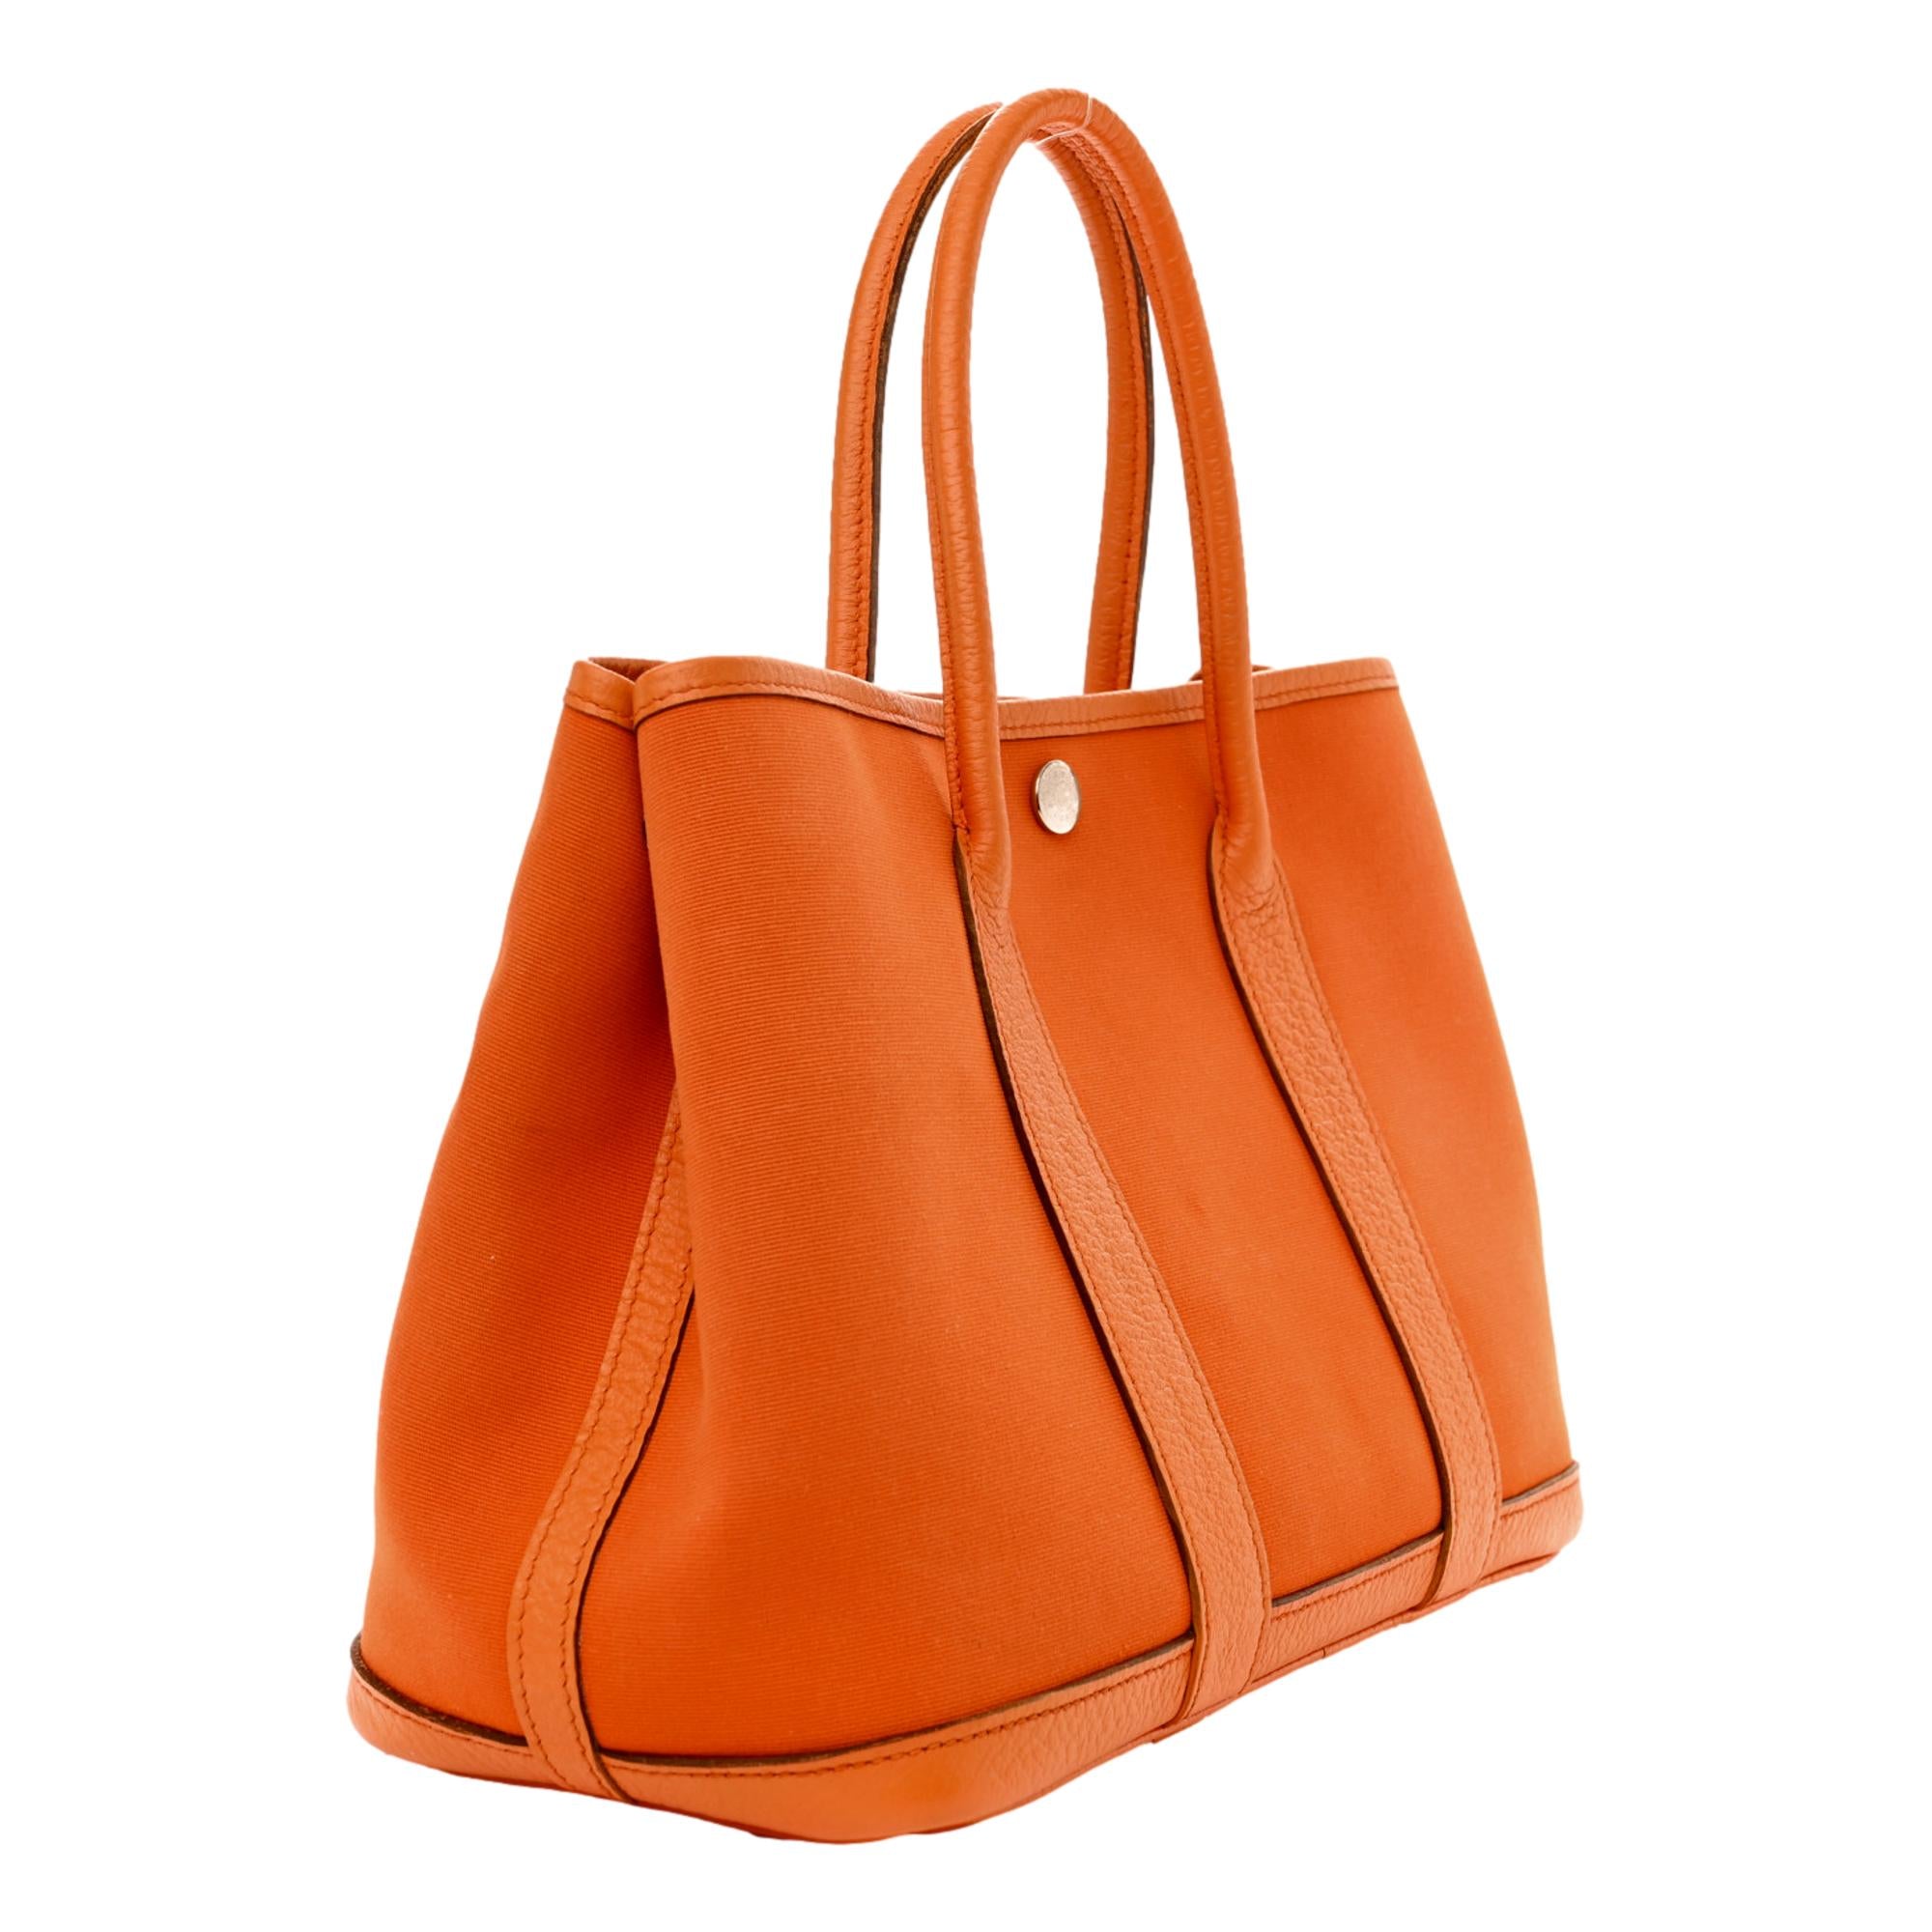 Hermes Garden Party 30 TPM Negonda Orange Toile and Cassis Leather Tote Bag